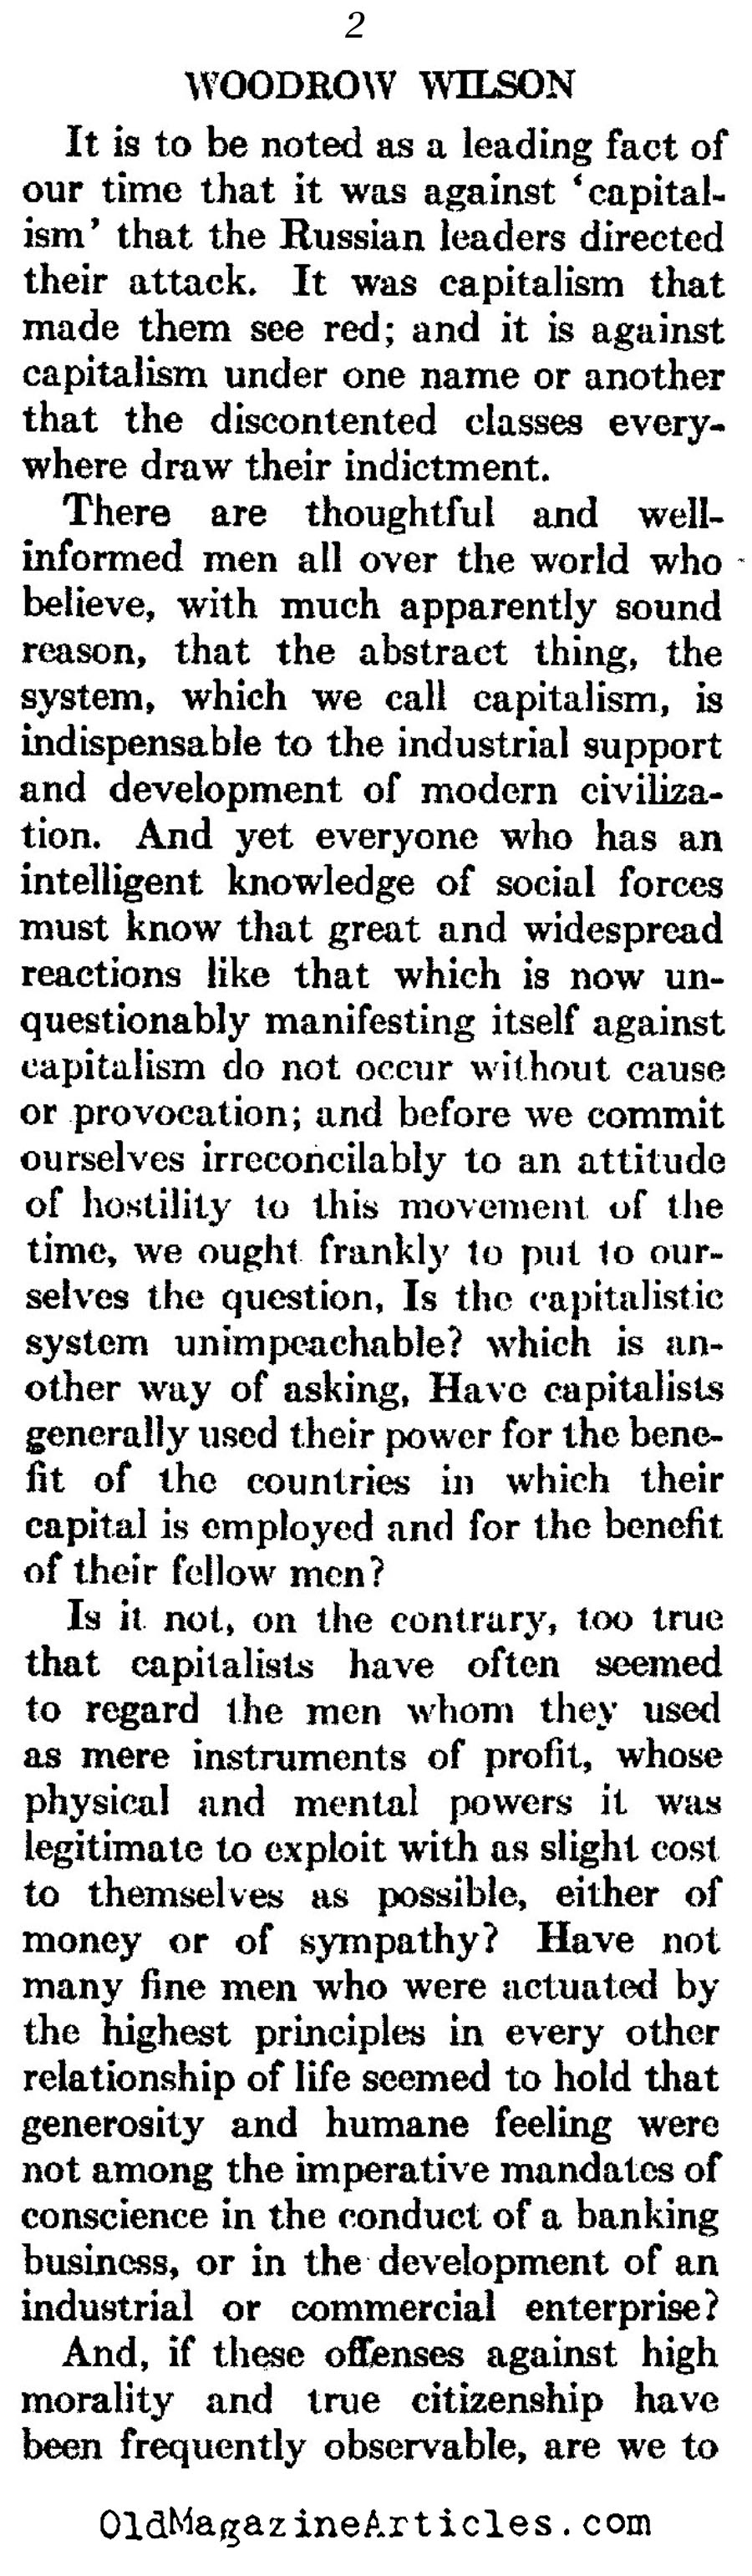 Woodrow Wilson on the Russian Revolution and the Red Scare (Atlantic Monthly, 1923)